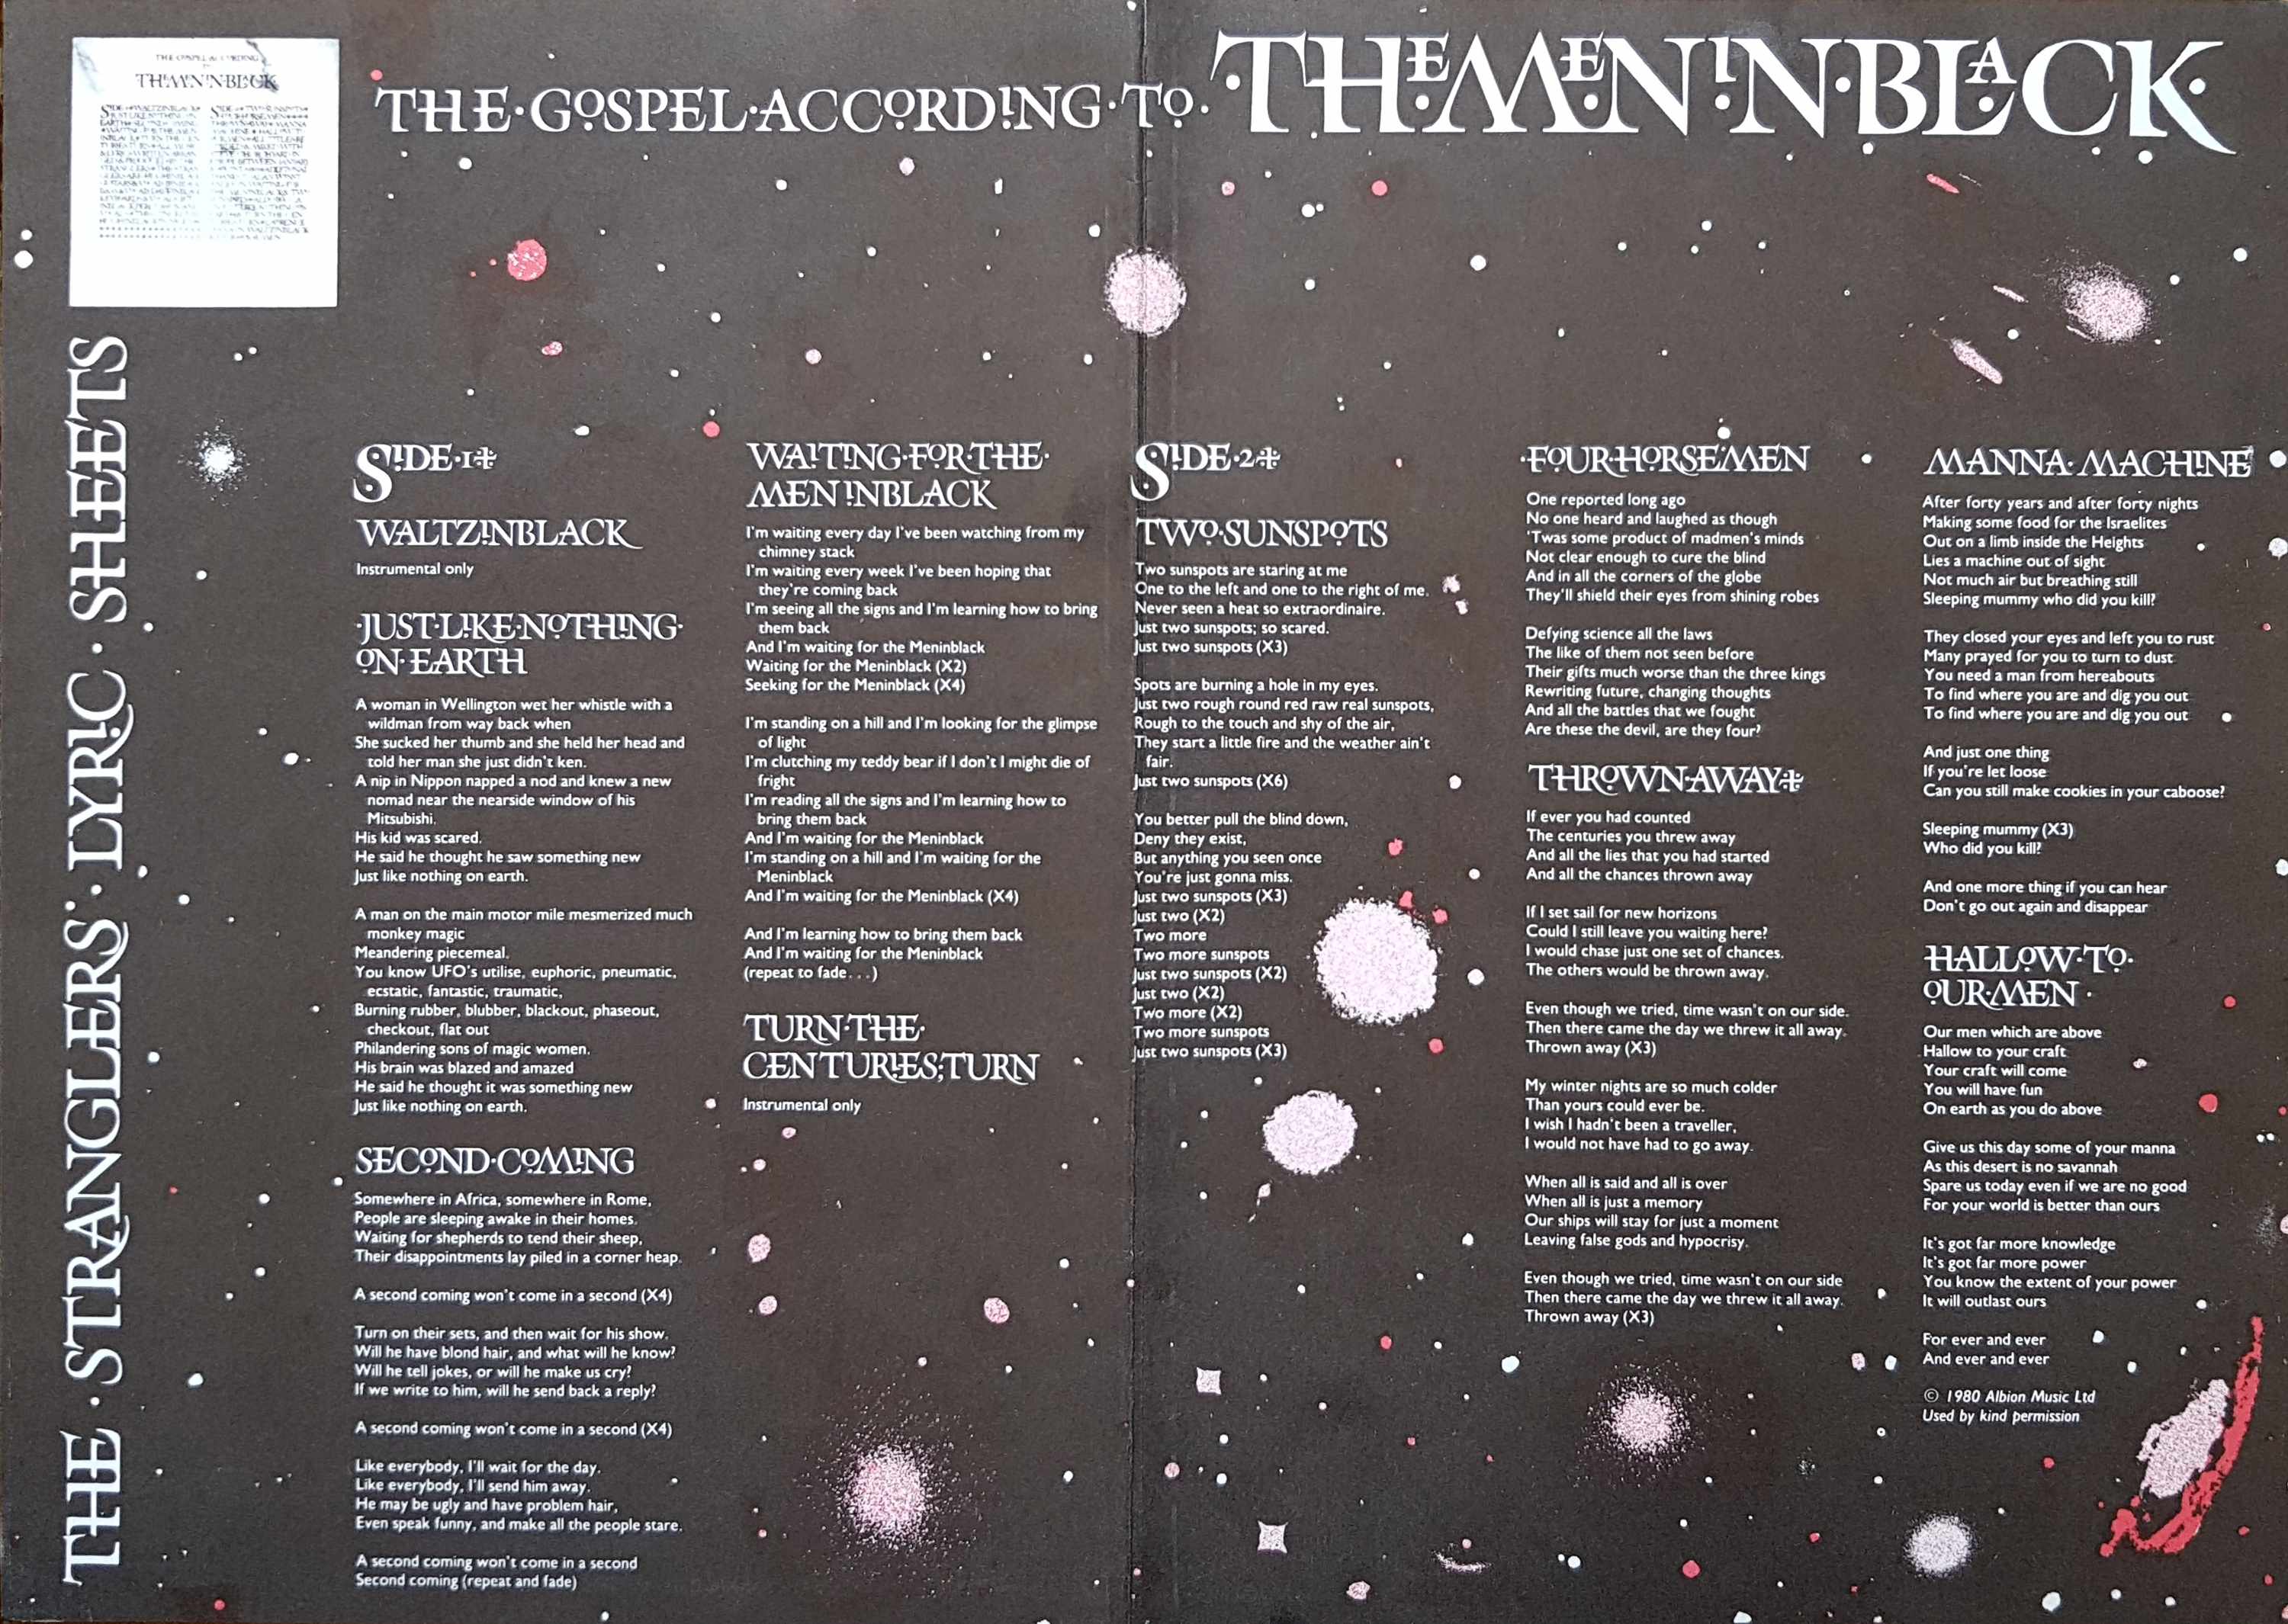 Picture of TGATTLYCSH The gospel according to themeninblack lyric sheets by artist The Stranglers  from The Stranglers books